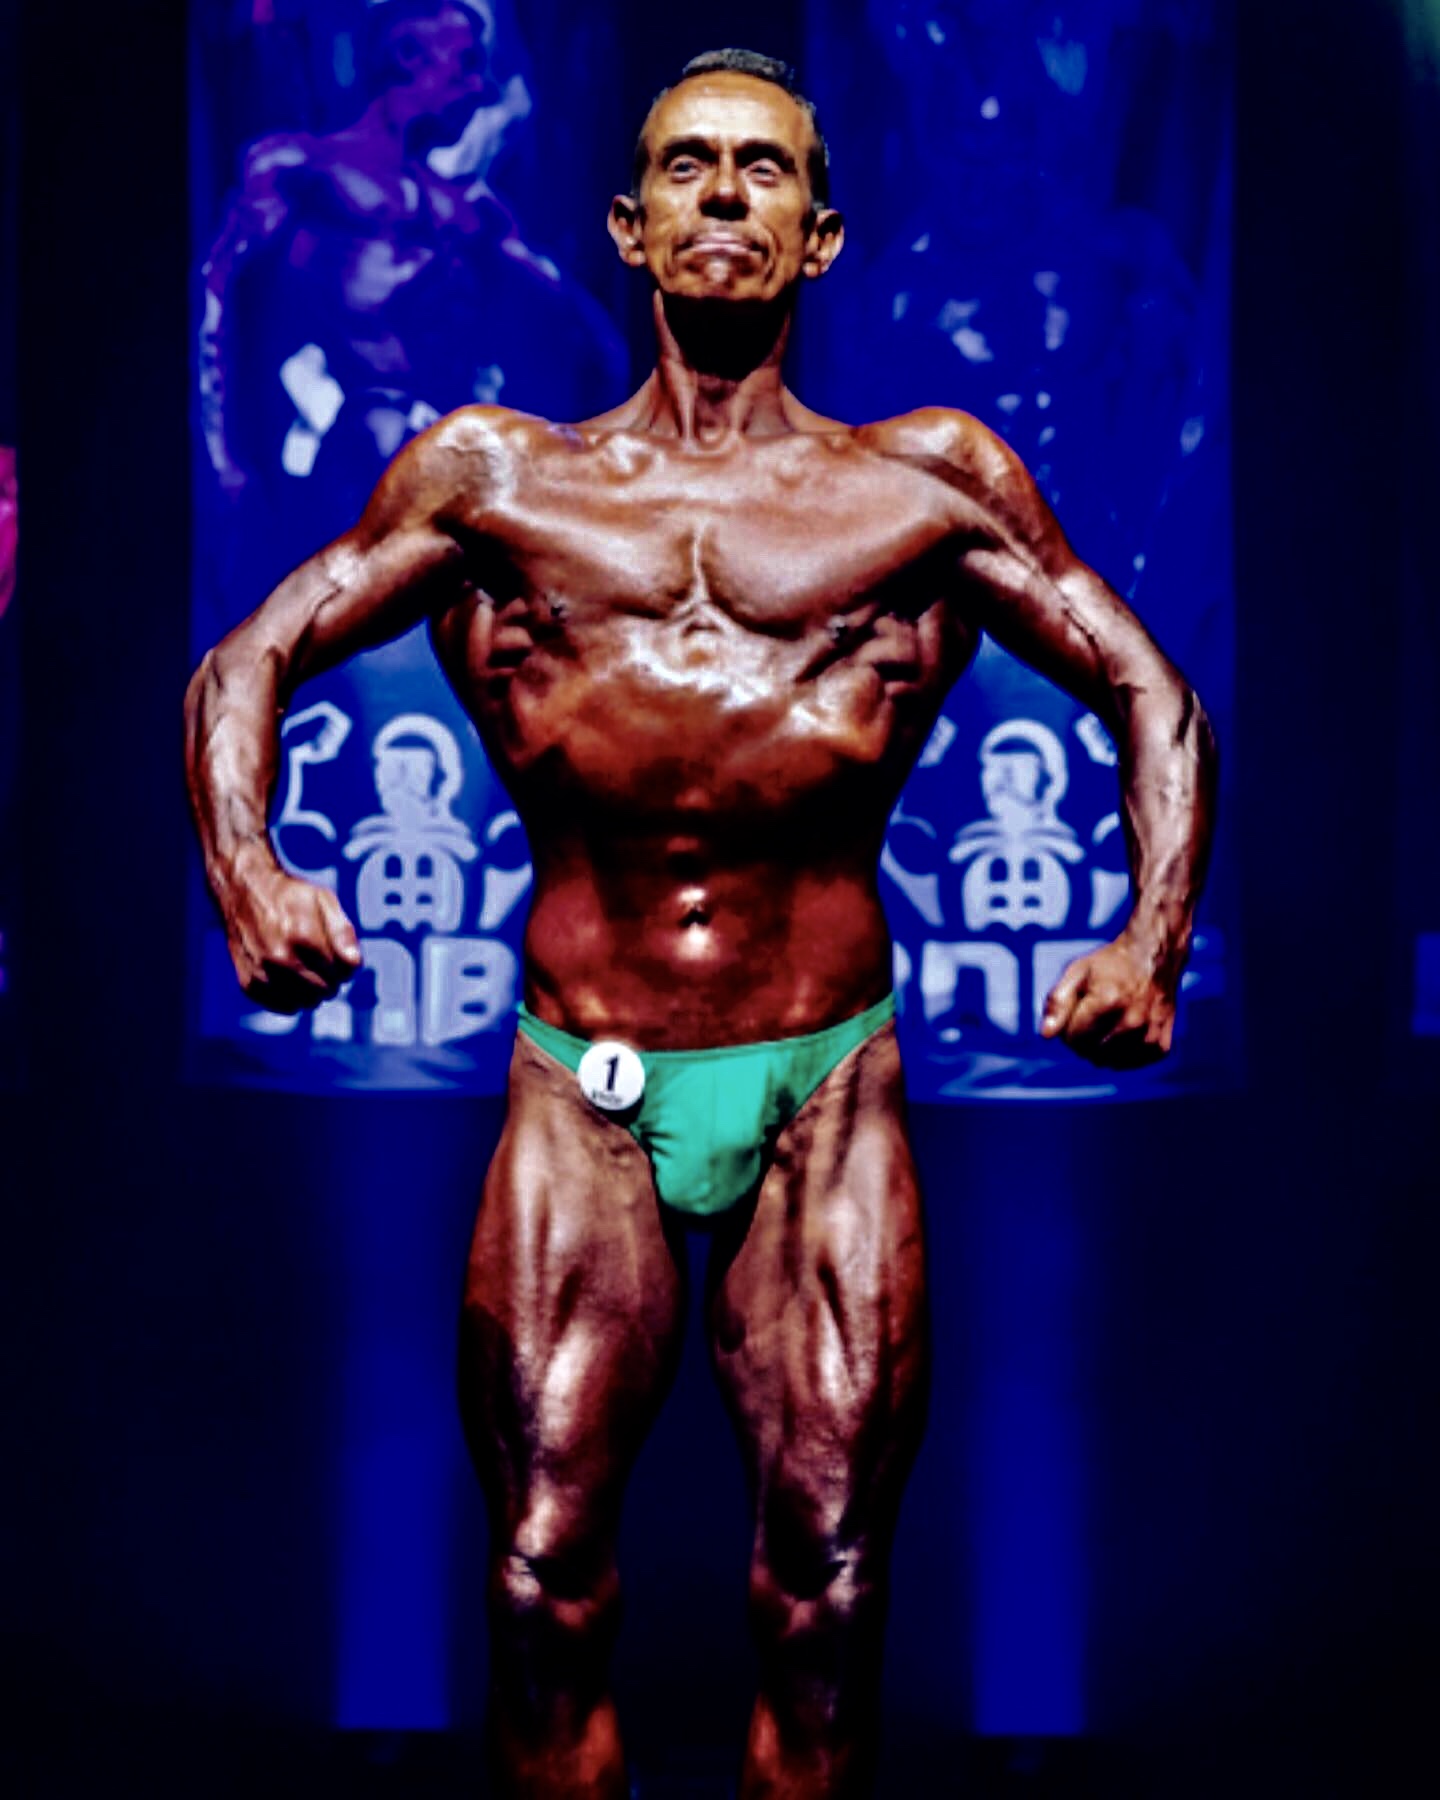 Tim Sharp Places 10th Over 50 in the 2019 BNBF BritishImage with link to high resolution version